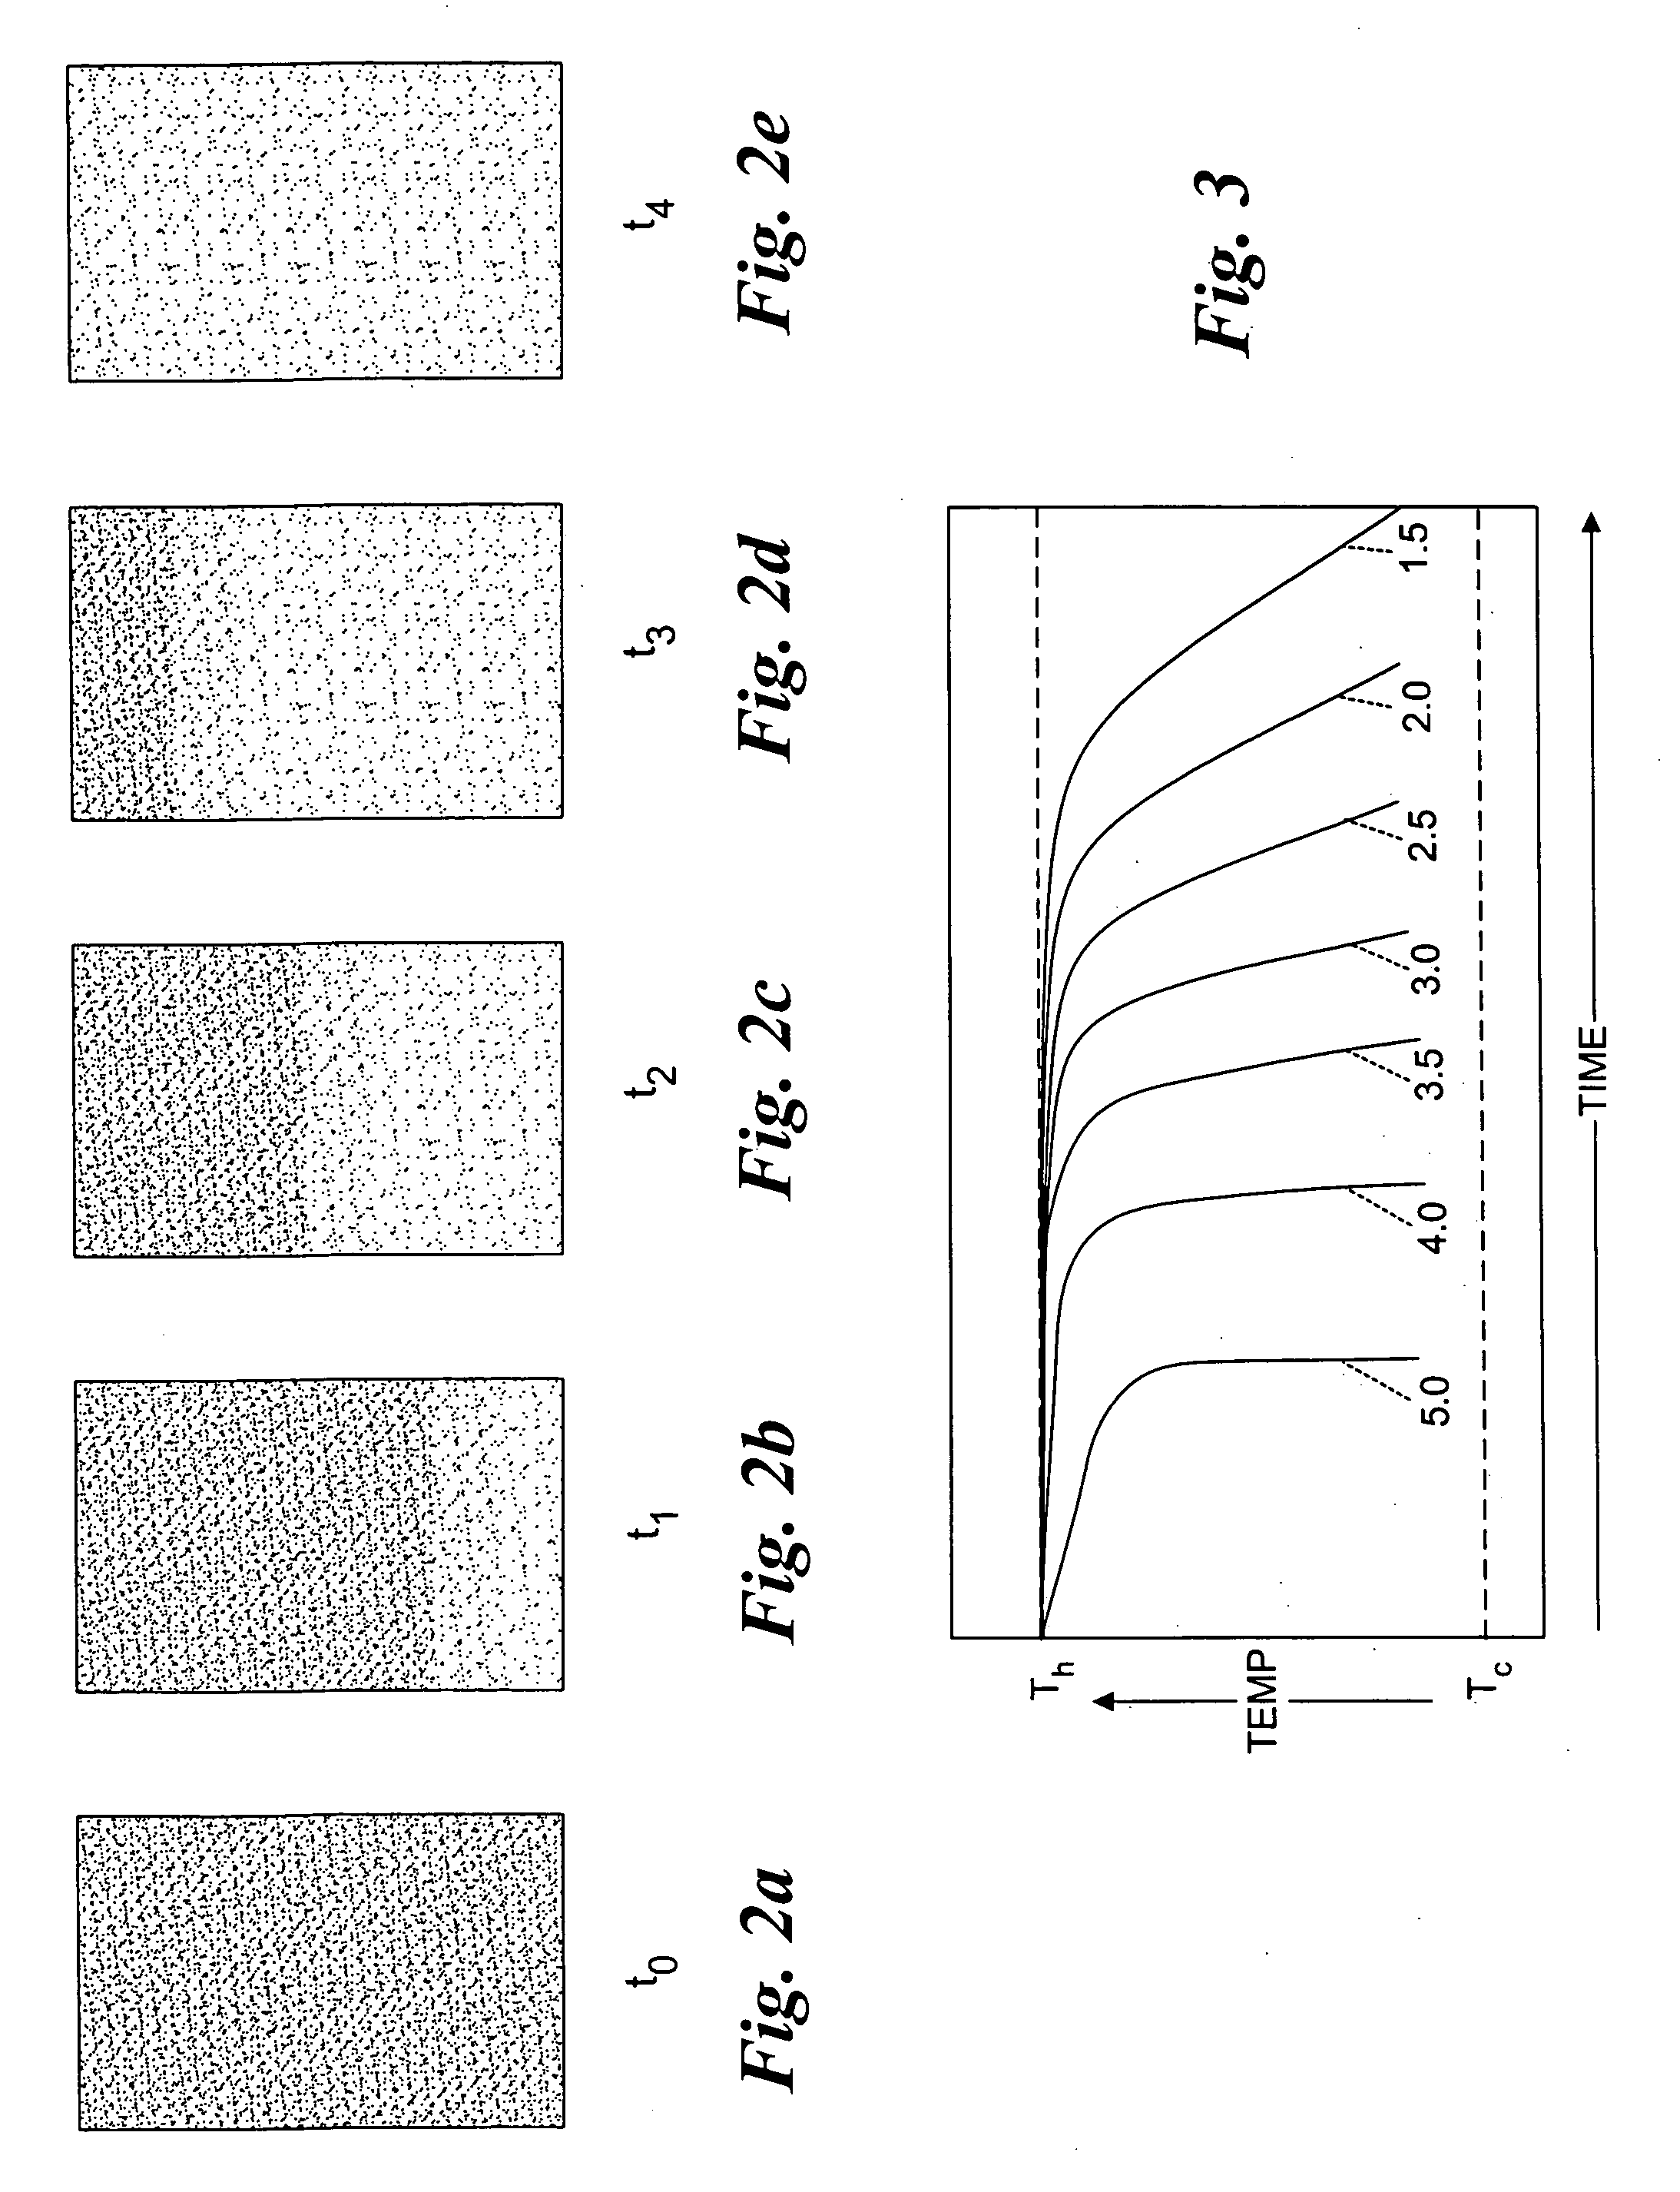 Method, apparatus, and system for projecting hot water availability for showering and bathing